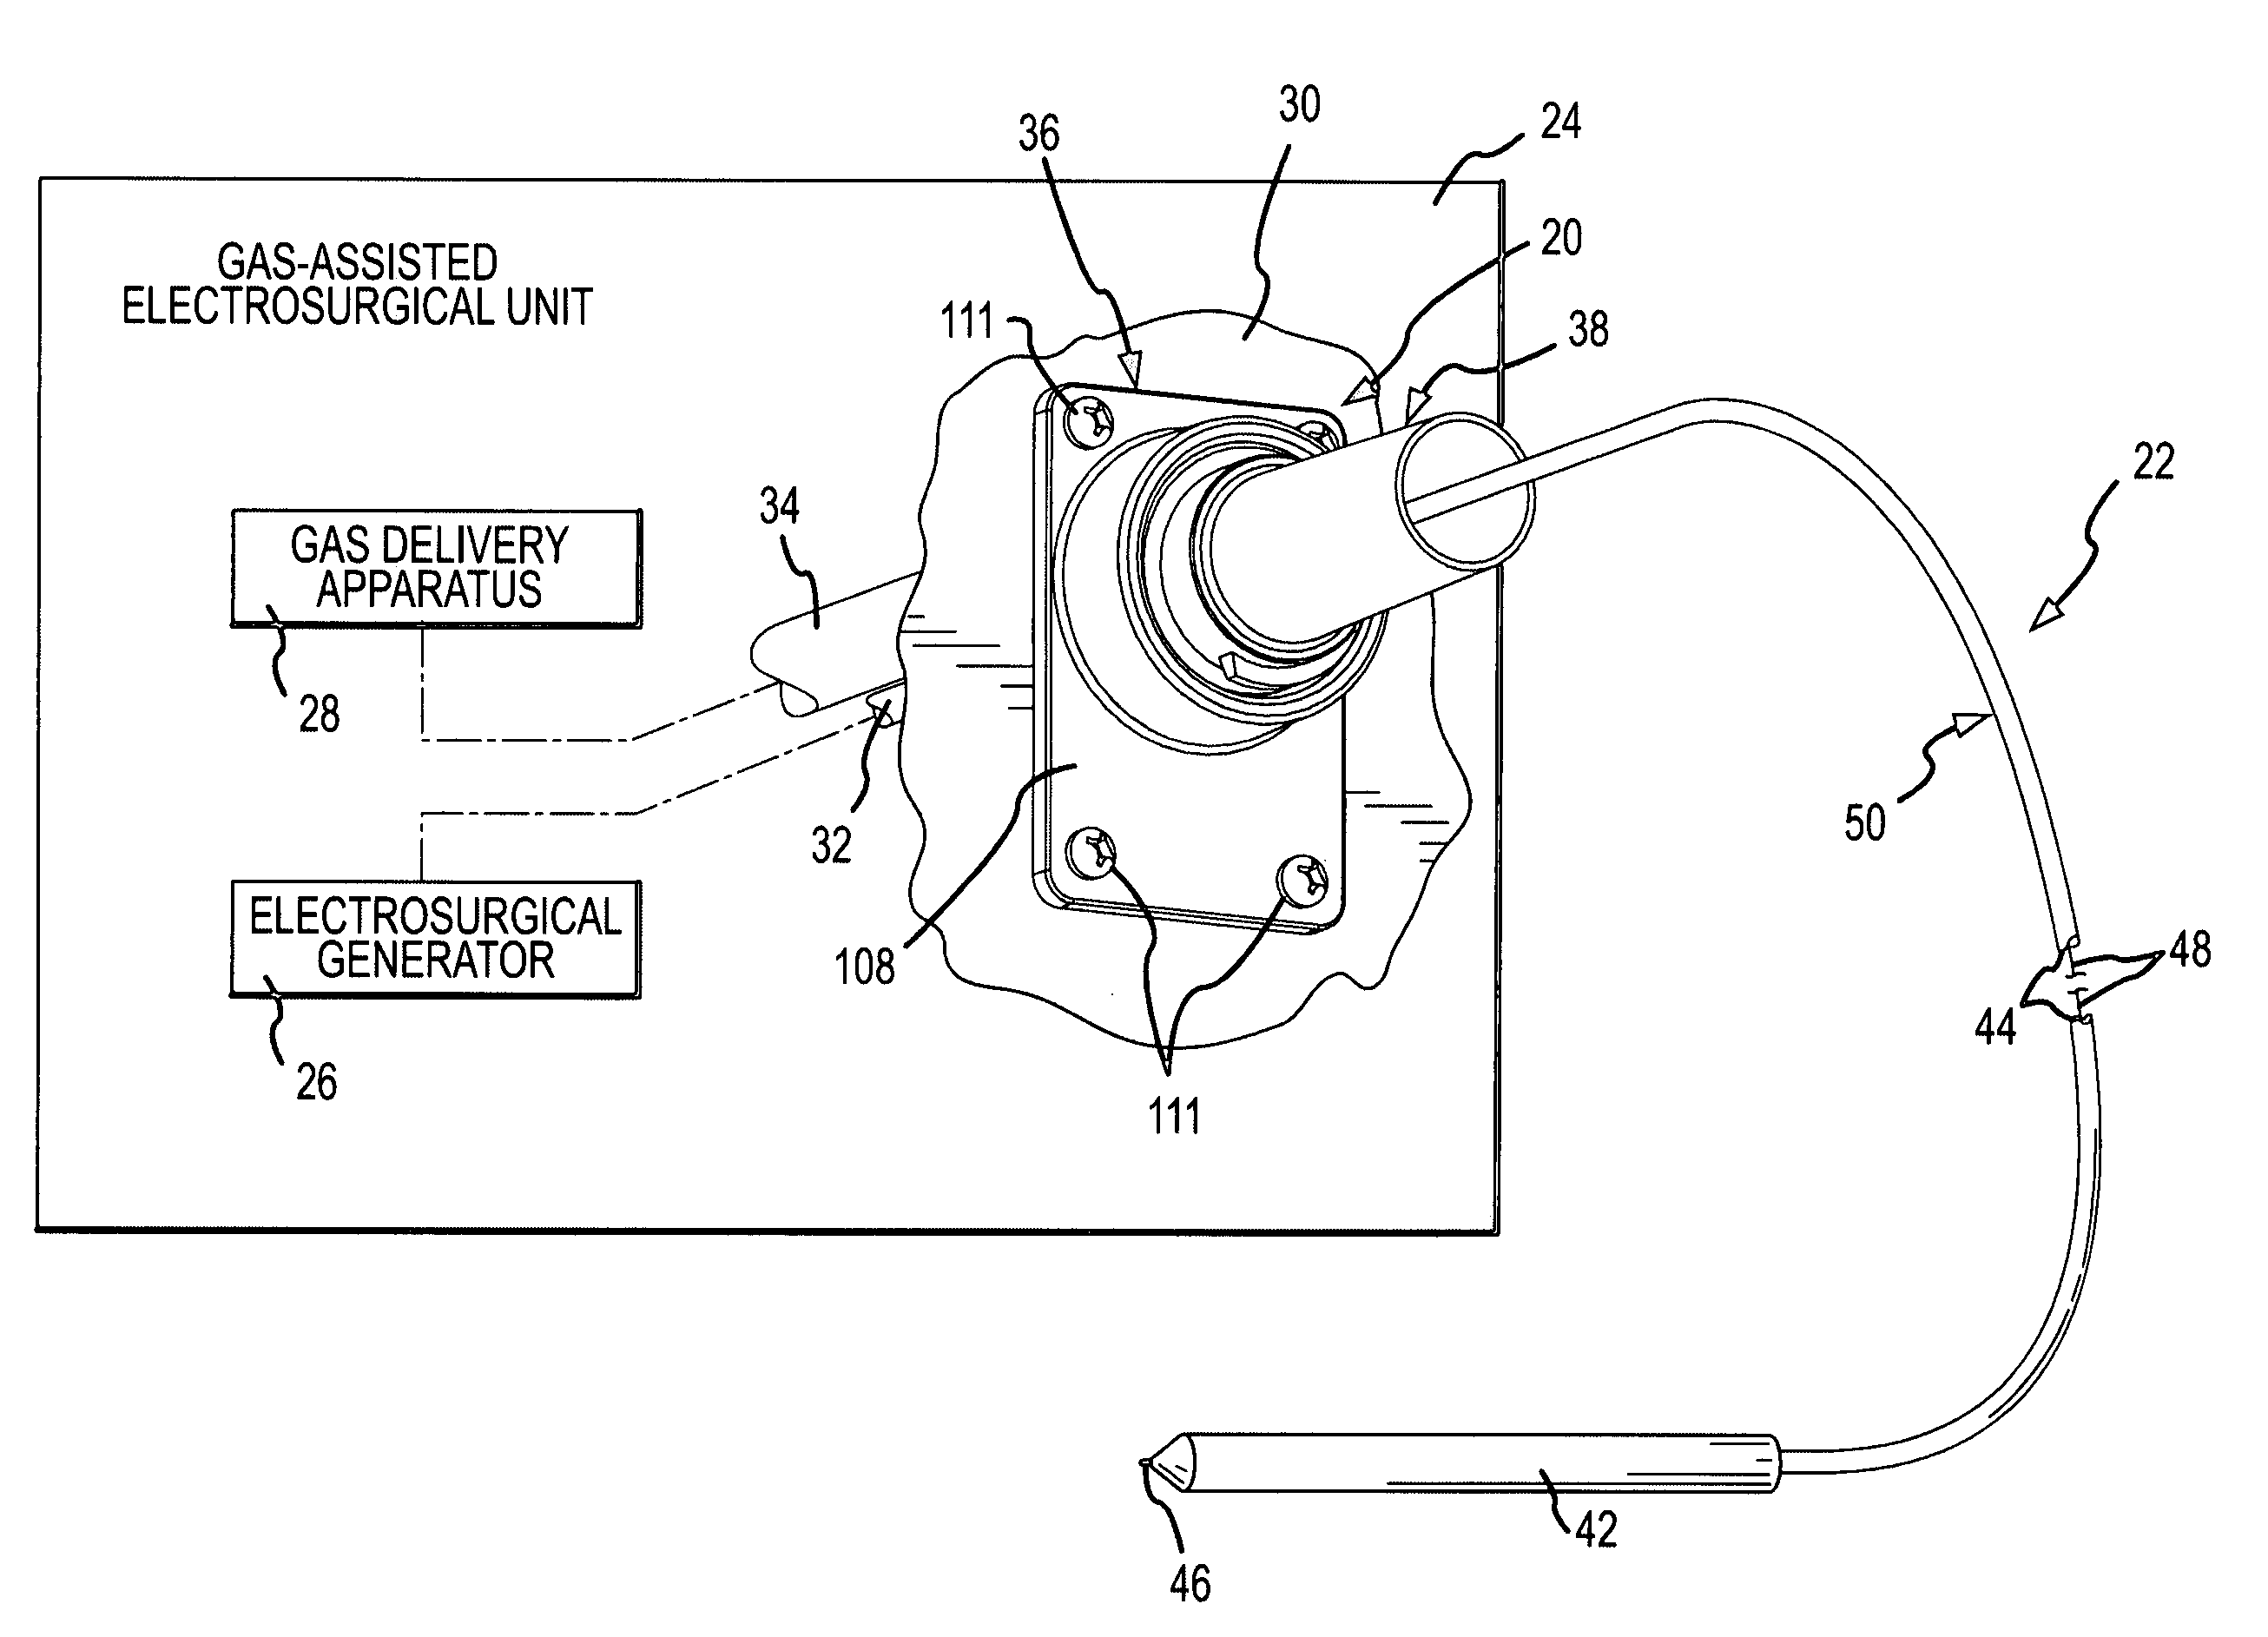 Gas-assisted electrosurgical accessory connector and method with improved gas sealing and biasing for maintaining a gas tight seal